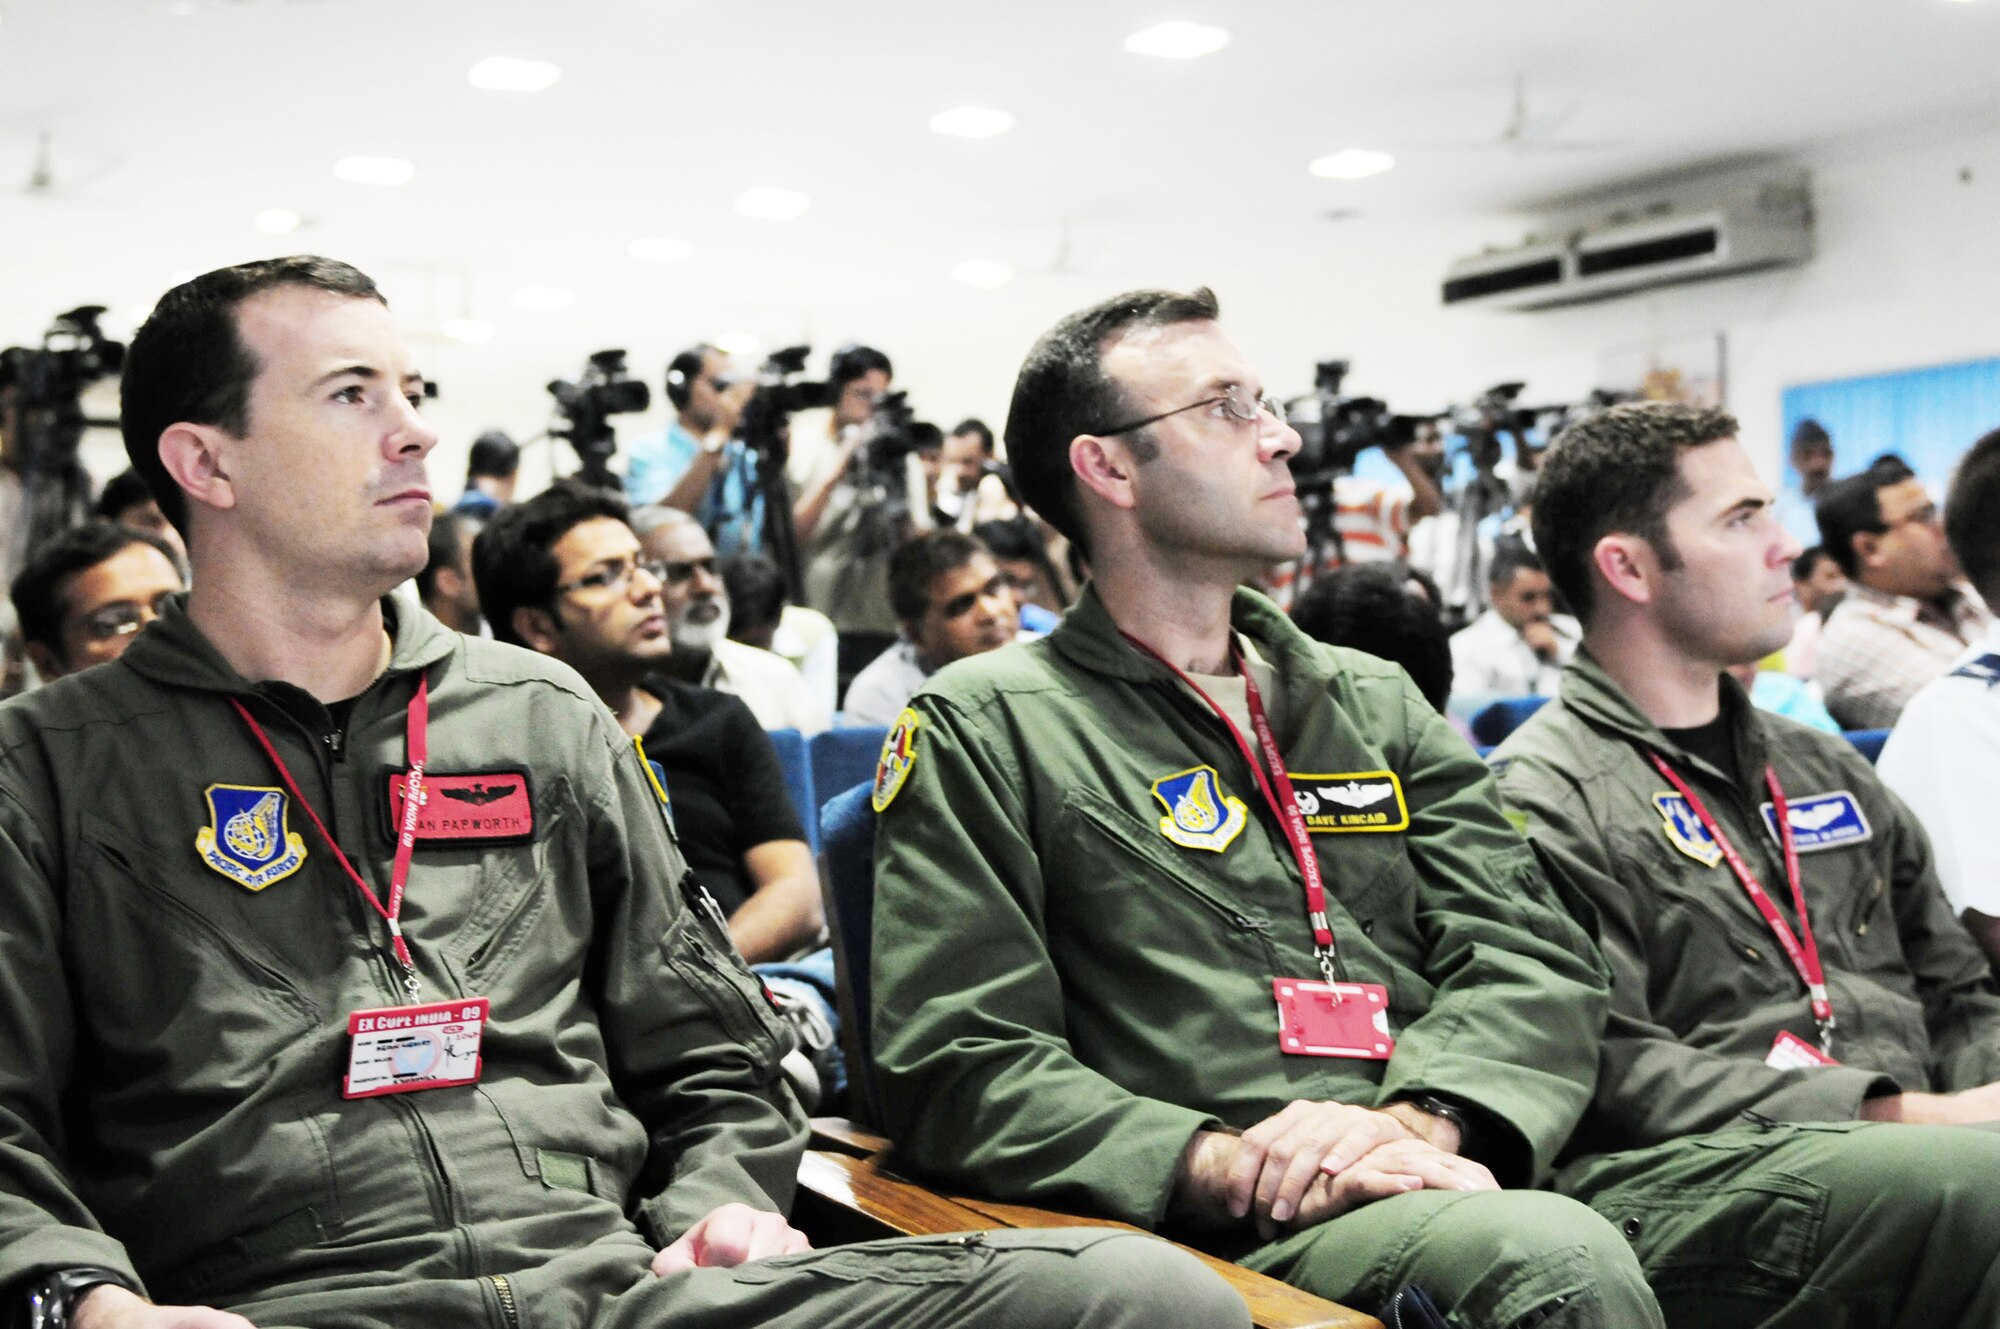 Maj. Sean Papworth (L), Lt. Col. Dave Kincaid and Capt. Patrick McBride standby to give aircraft related expertise during a Cope India press conference Oct. 19, 2009, at Air Force Station Agra, India. More than 150 U.S. Air Force and Army personnel are participating in Cope India, a United States and India airlift exercise that provides training for humanitarian assistance and disaster relief operations. Major Papworth is from the 535th Airlift Squadron at Hickam Air Force Base, Hawaii; Colonel Kincaid is from the 36th AS at Yokota Air Base, Japan; Captain McBride is from the 115th AS at Channel Islands Air National Guard Station, Port Hueneme, Calif. (U.S. Air Force photo/Capt. Genieve David)